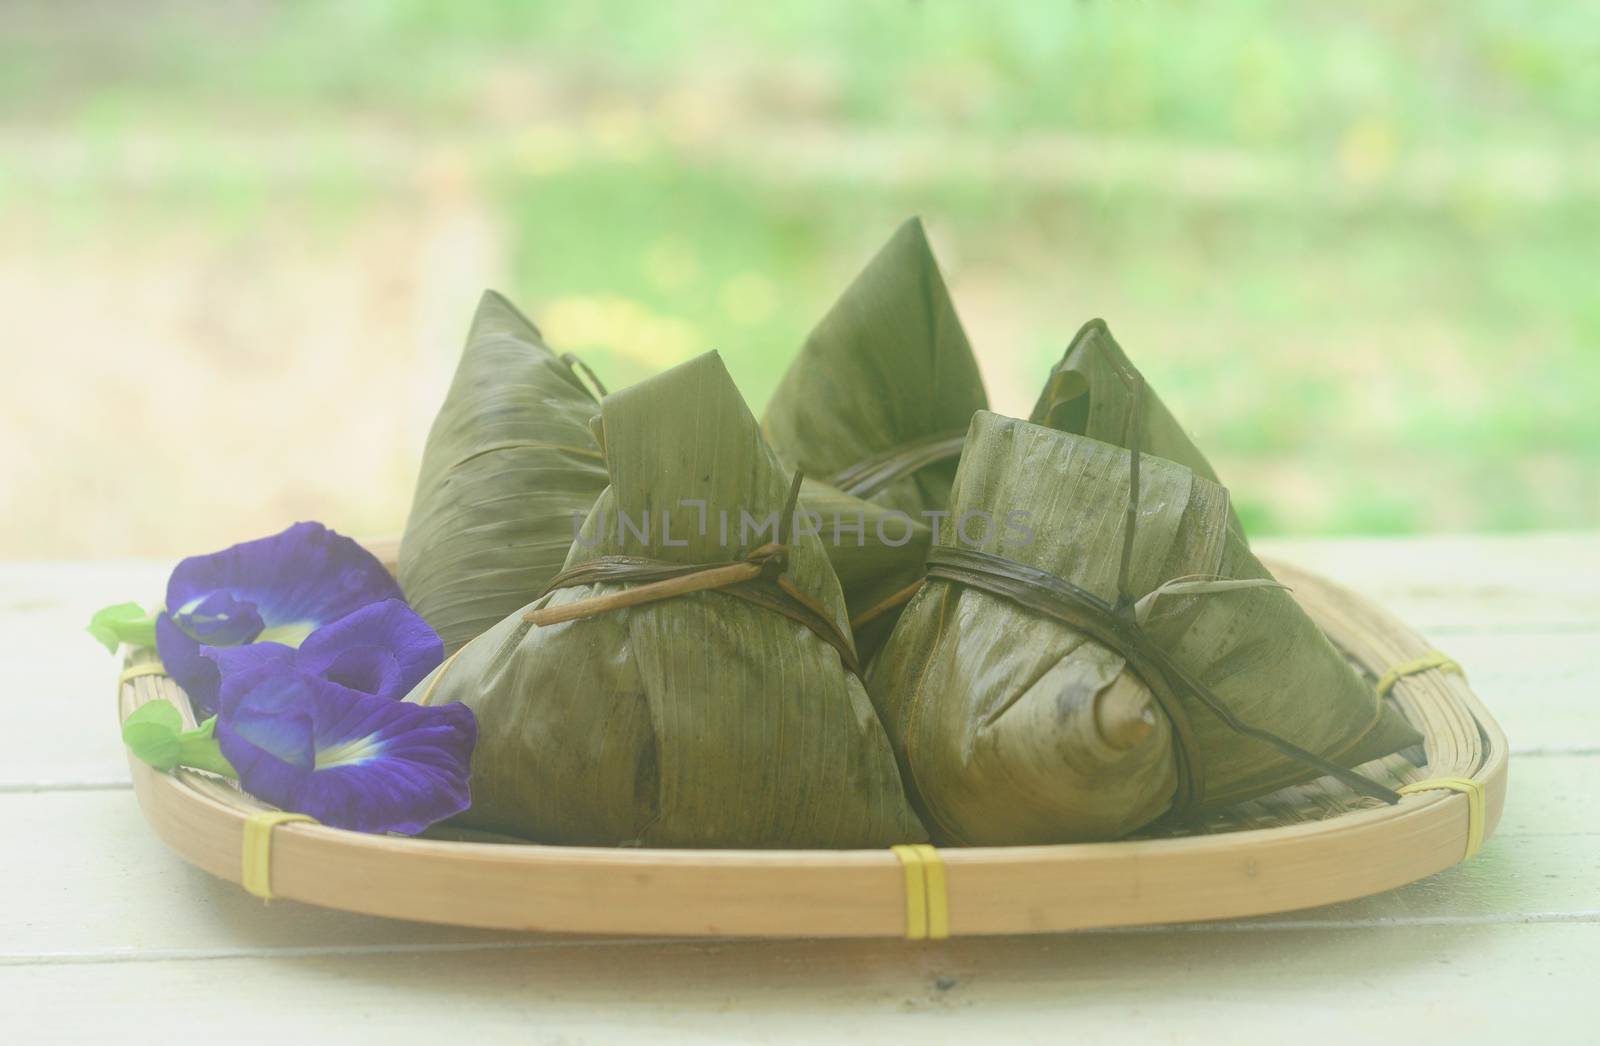 Chinese tradition food - Chinese Steamed Rice Dumpling  with blur background outdoor.Zongzi or traditional chinese sticky rice dumpling usually taken during festival occasion. 